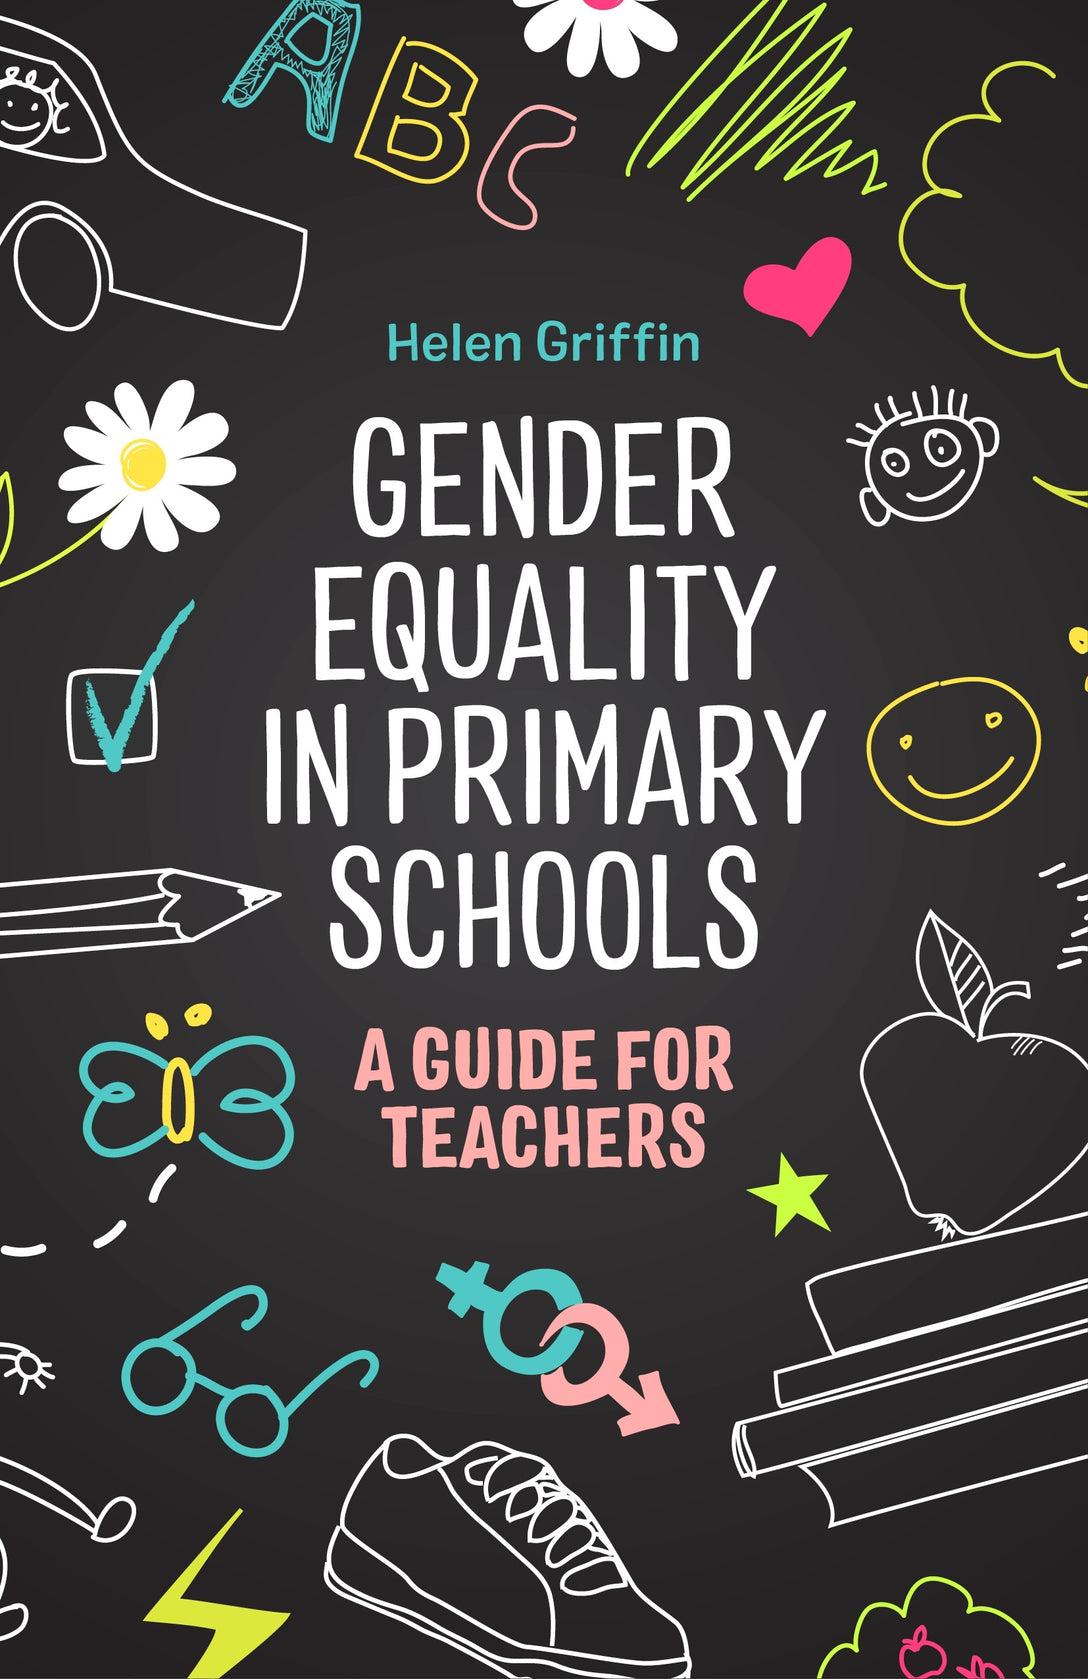 Gender Equality in Primary Schools by Helen Griffin